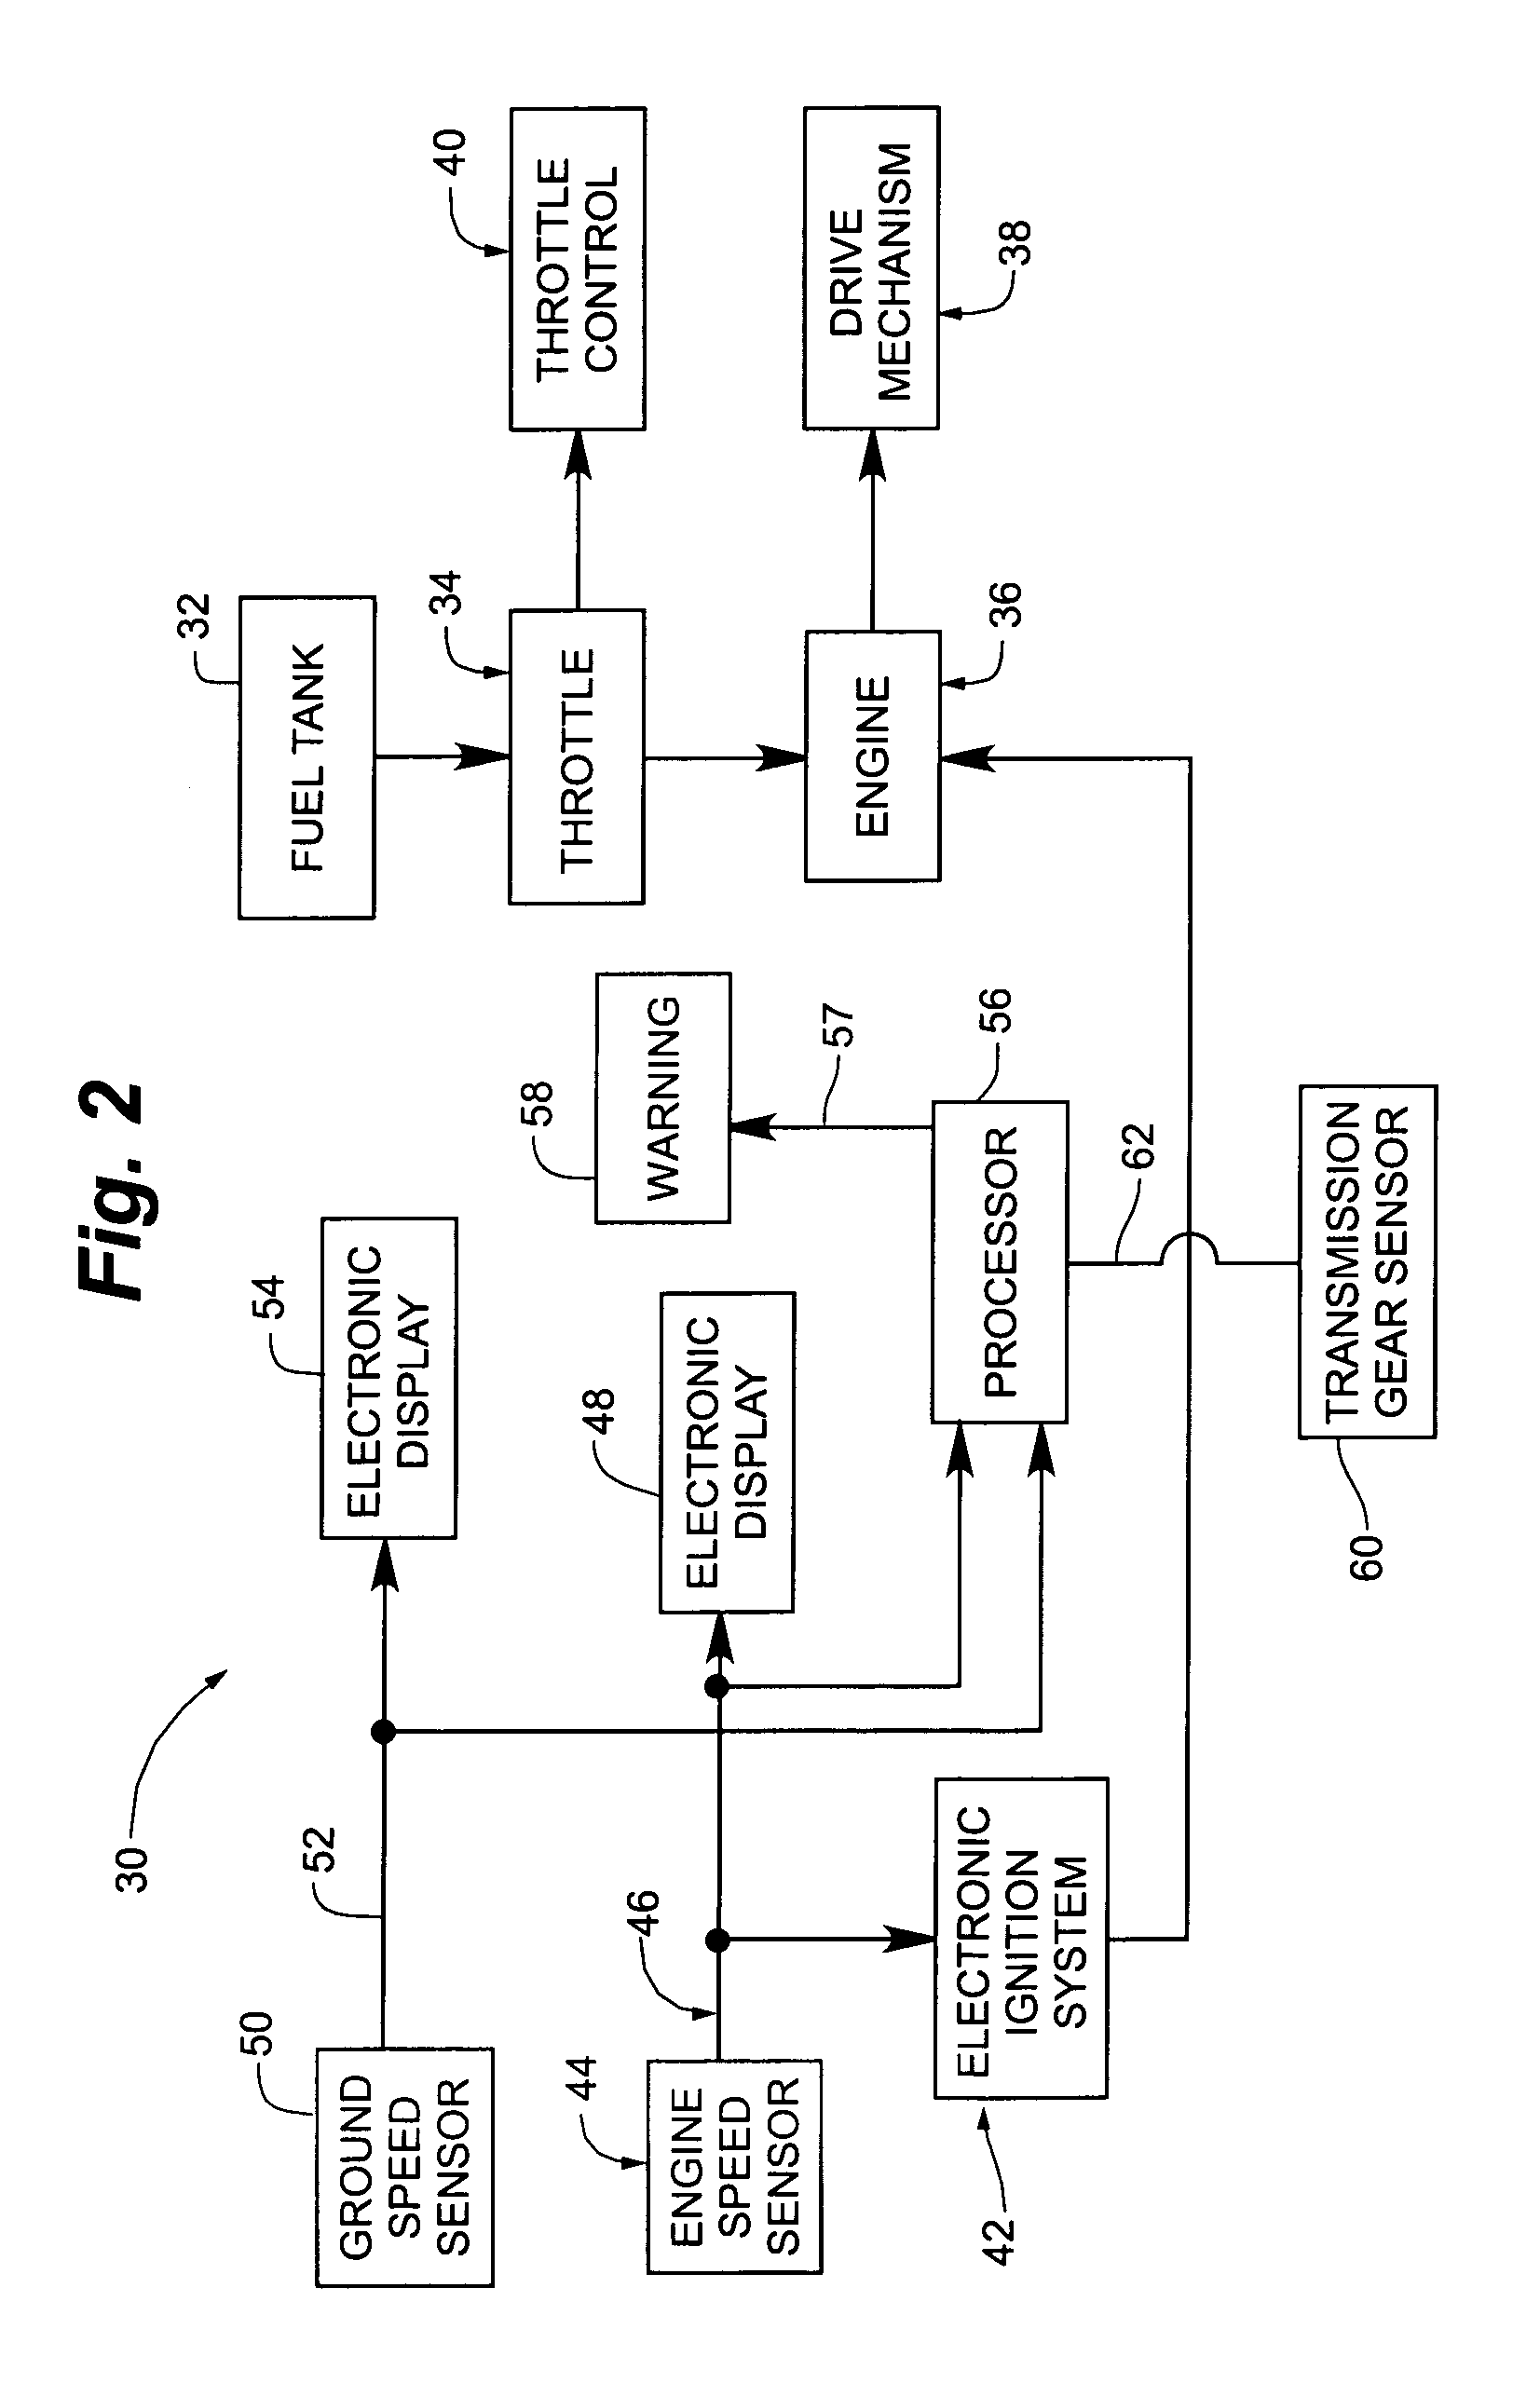 System and method for warning an operator of a vehicle if the vehicle is operating in a condition that may result in drive belt failure